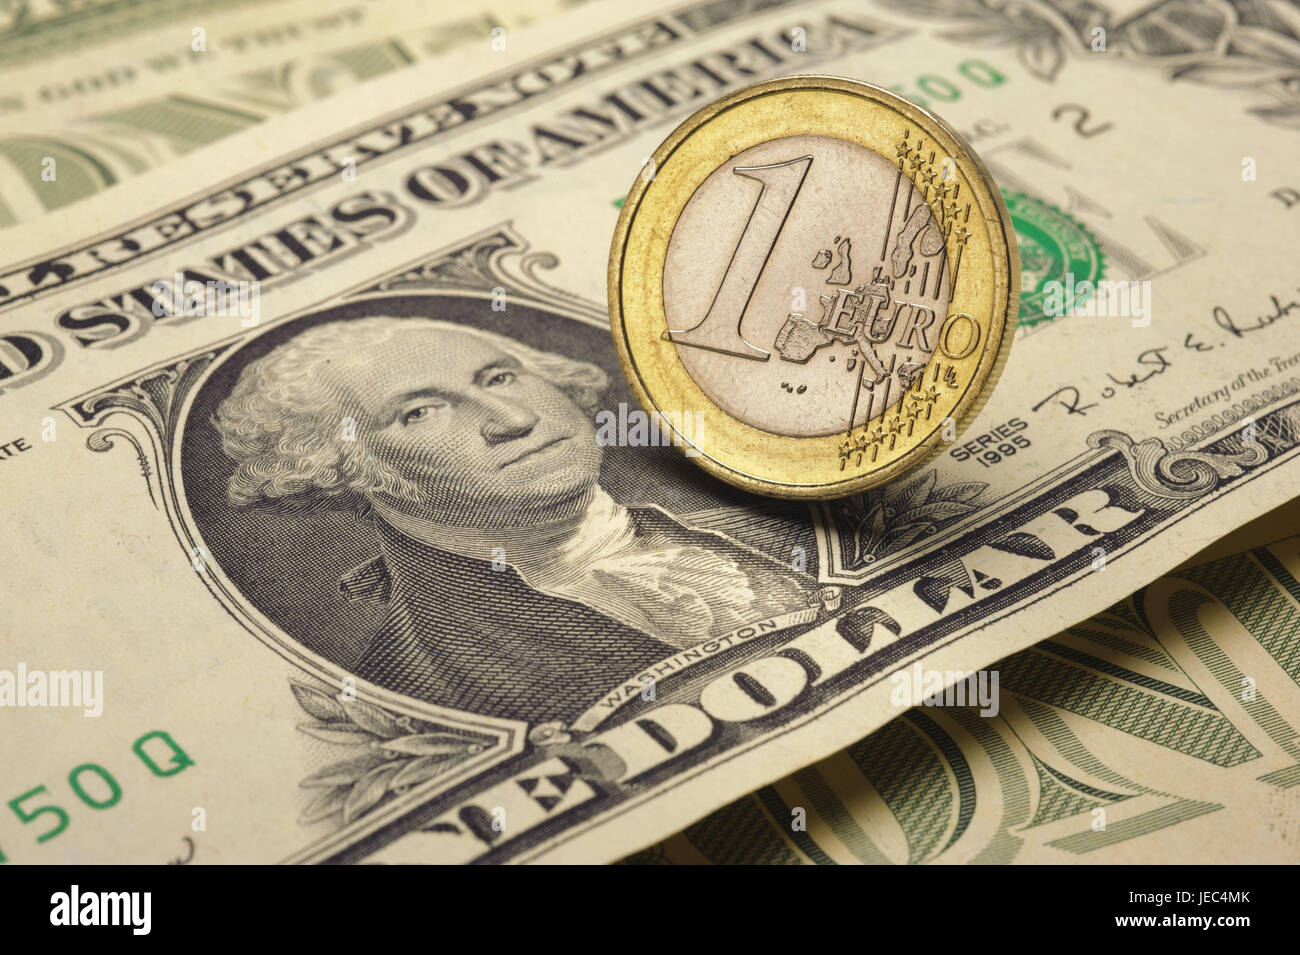 Dollar of bank note and 1 euro of coin, Stock Photo